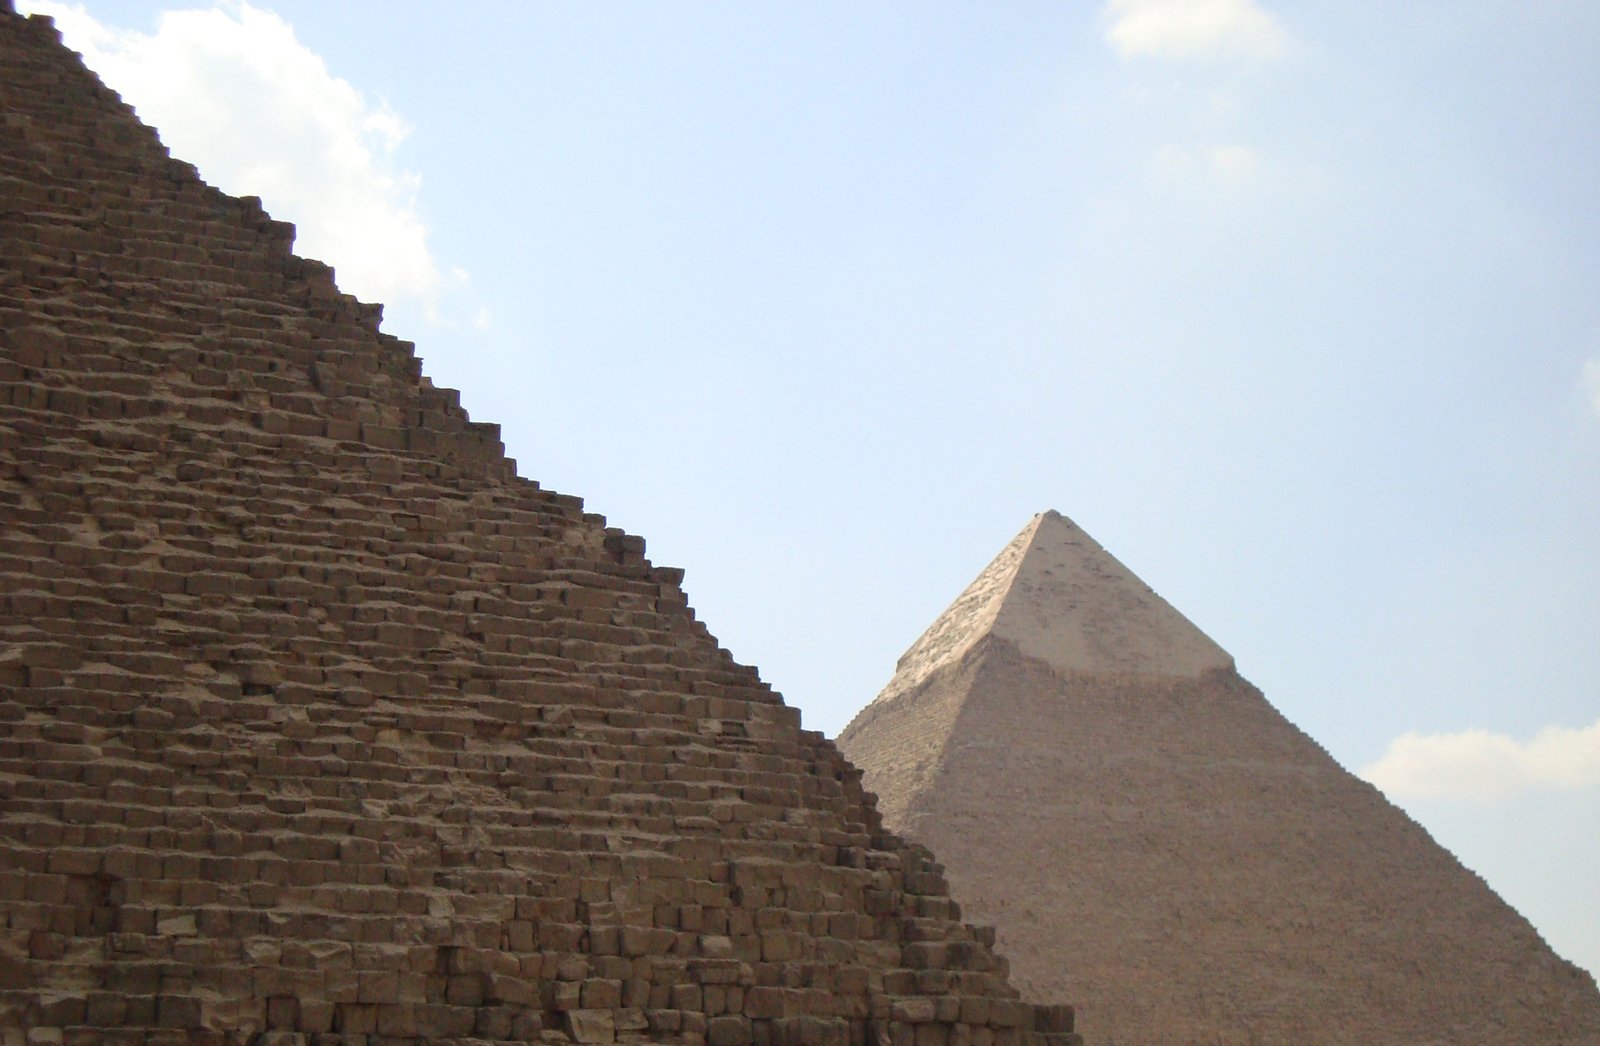 the pyramid and its massive brick wall in egypt